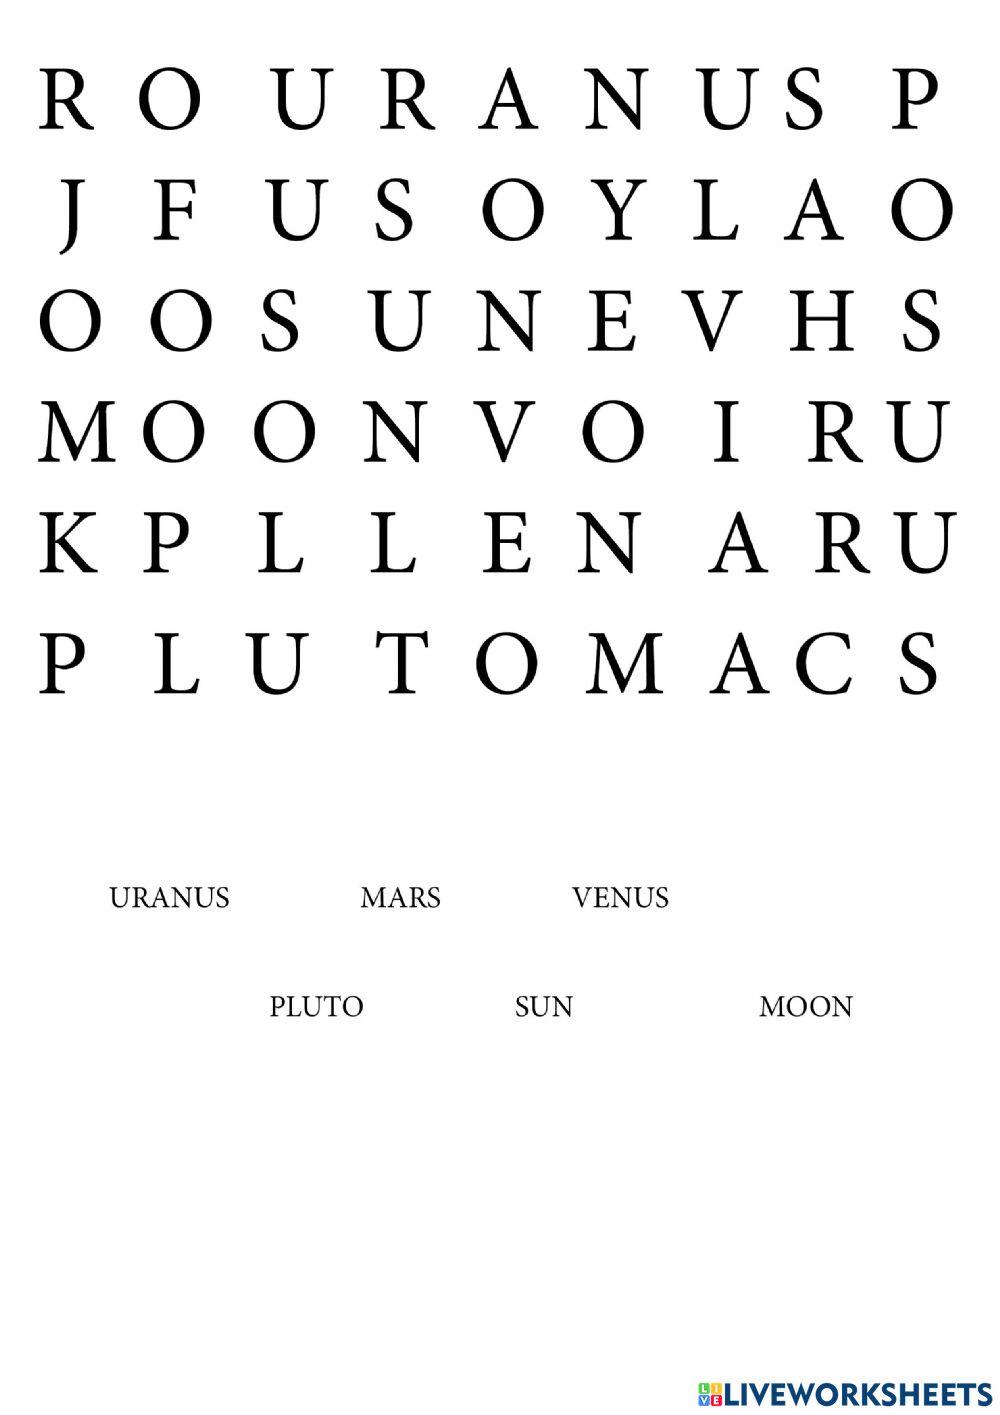 Solar systems word search